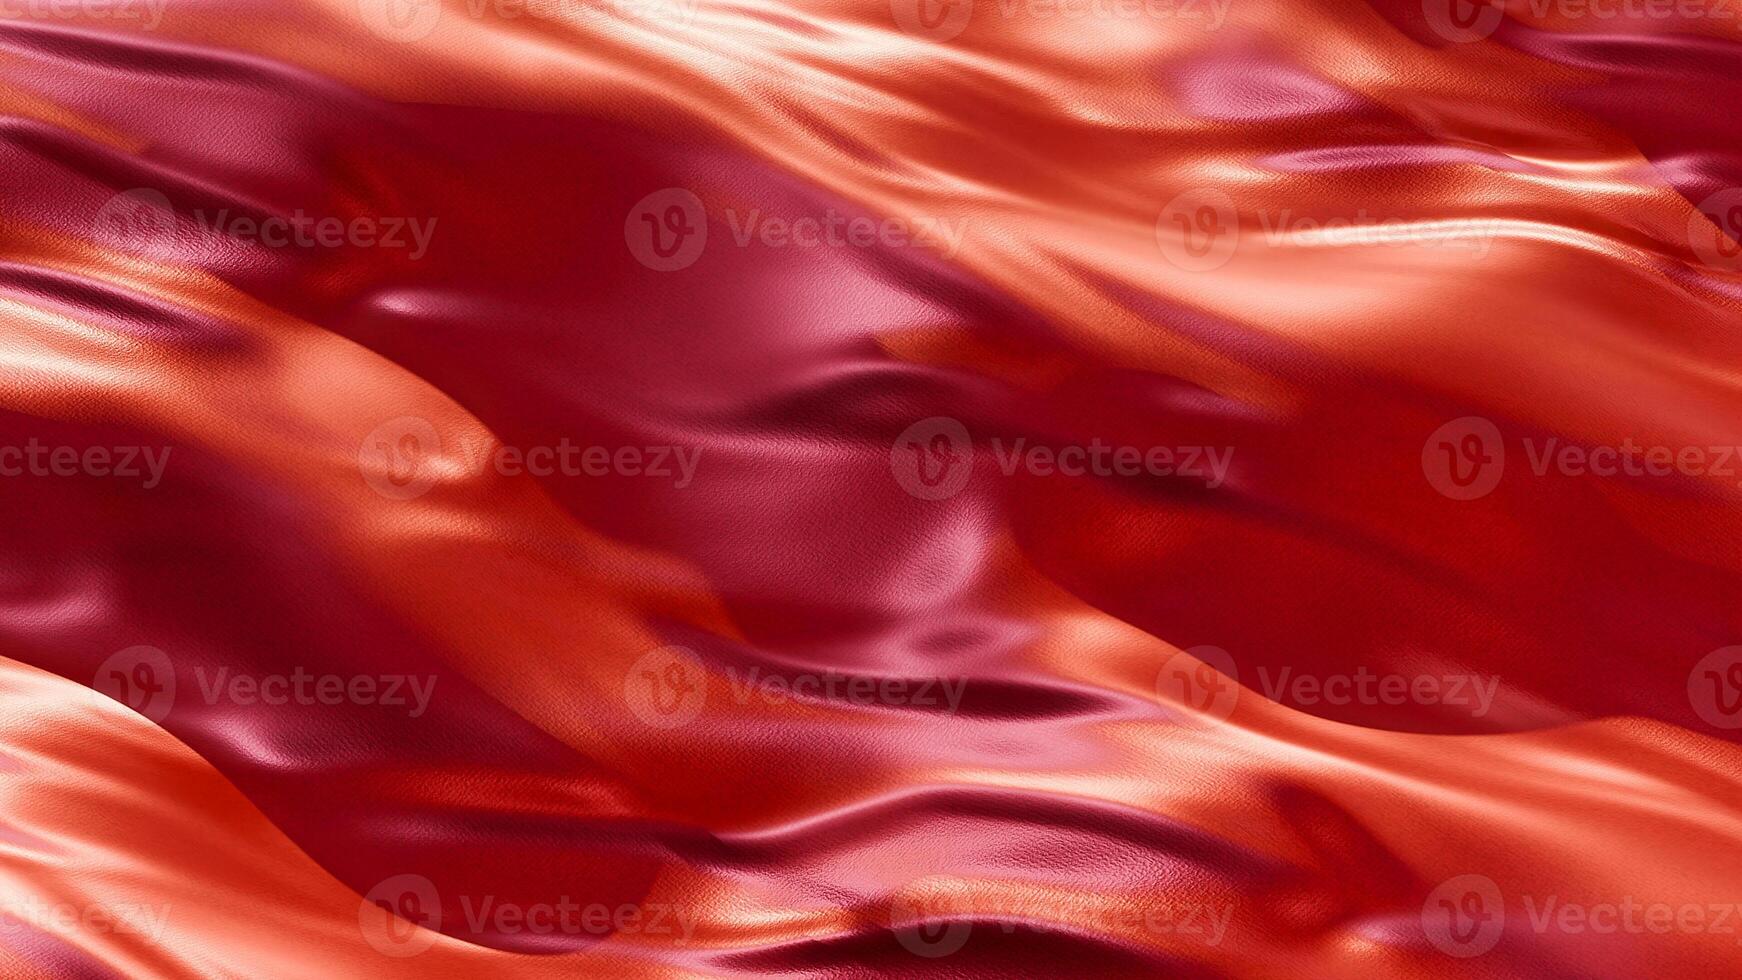 Elegant flowing silky satin fabric abstract background photo